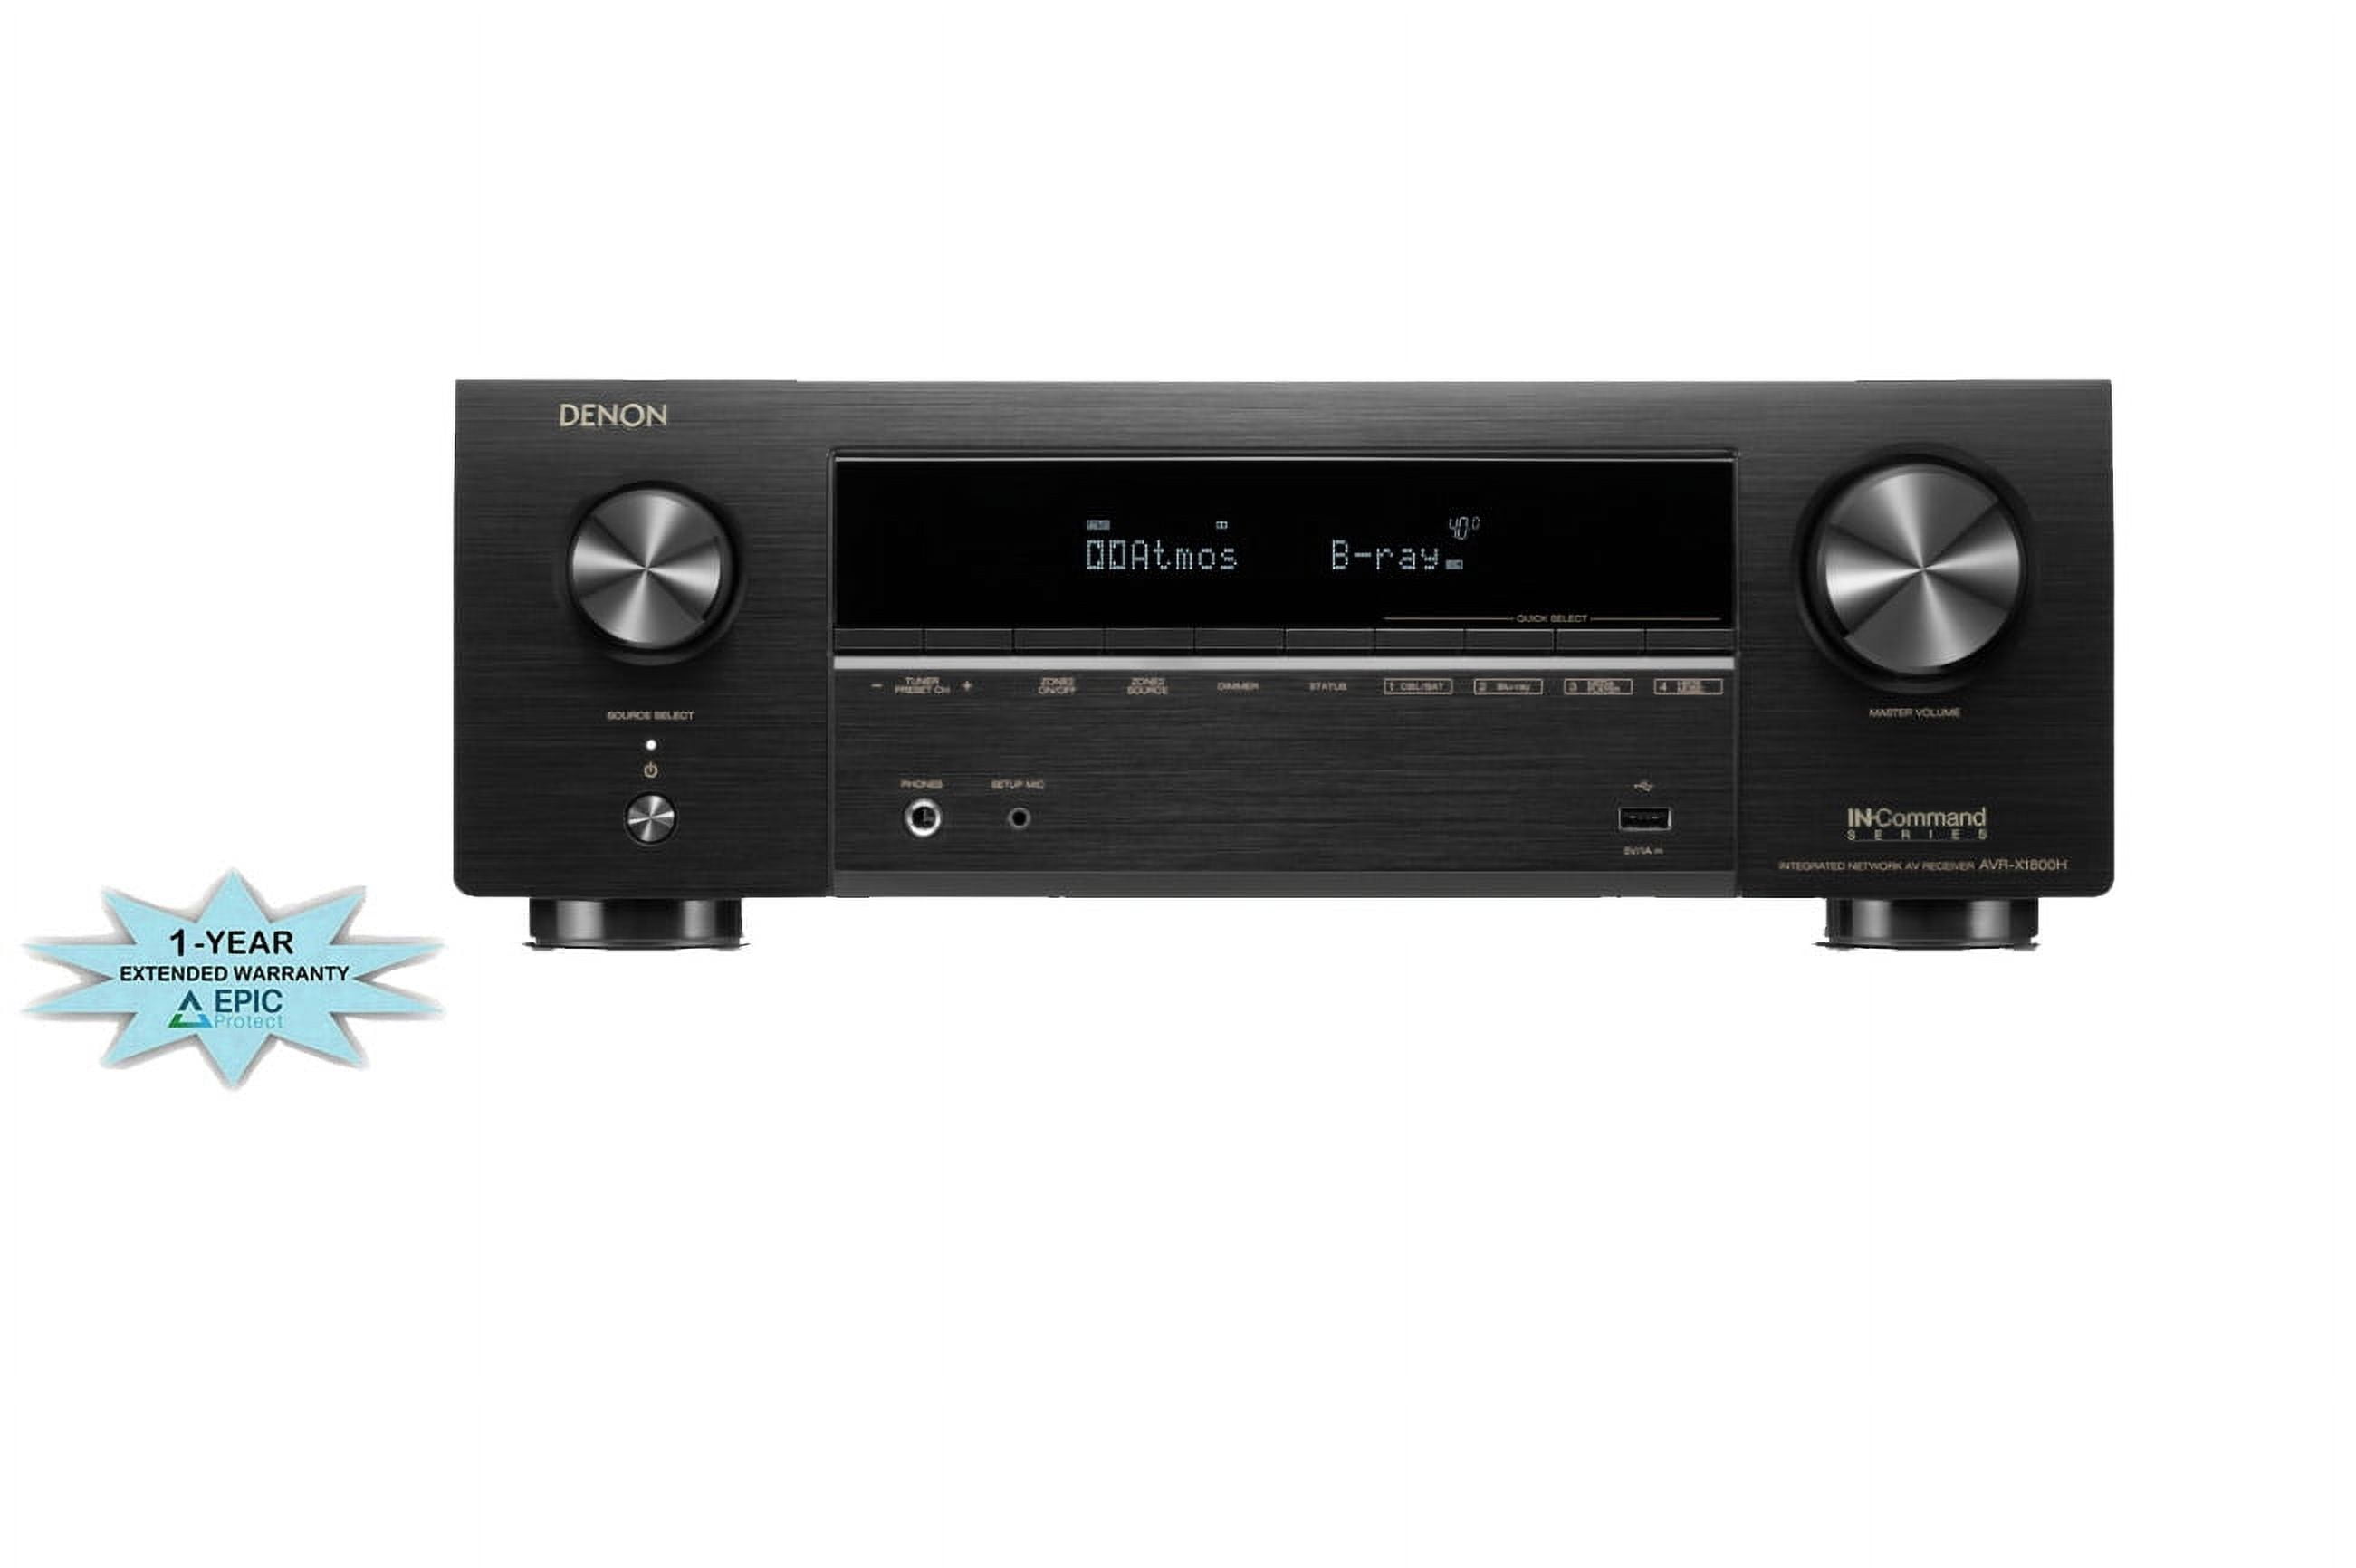 Receiver Stereo 8K HEOS Built-In DRA-900H AV Channel Denon with 2.1